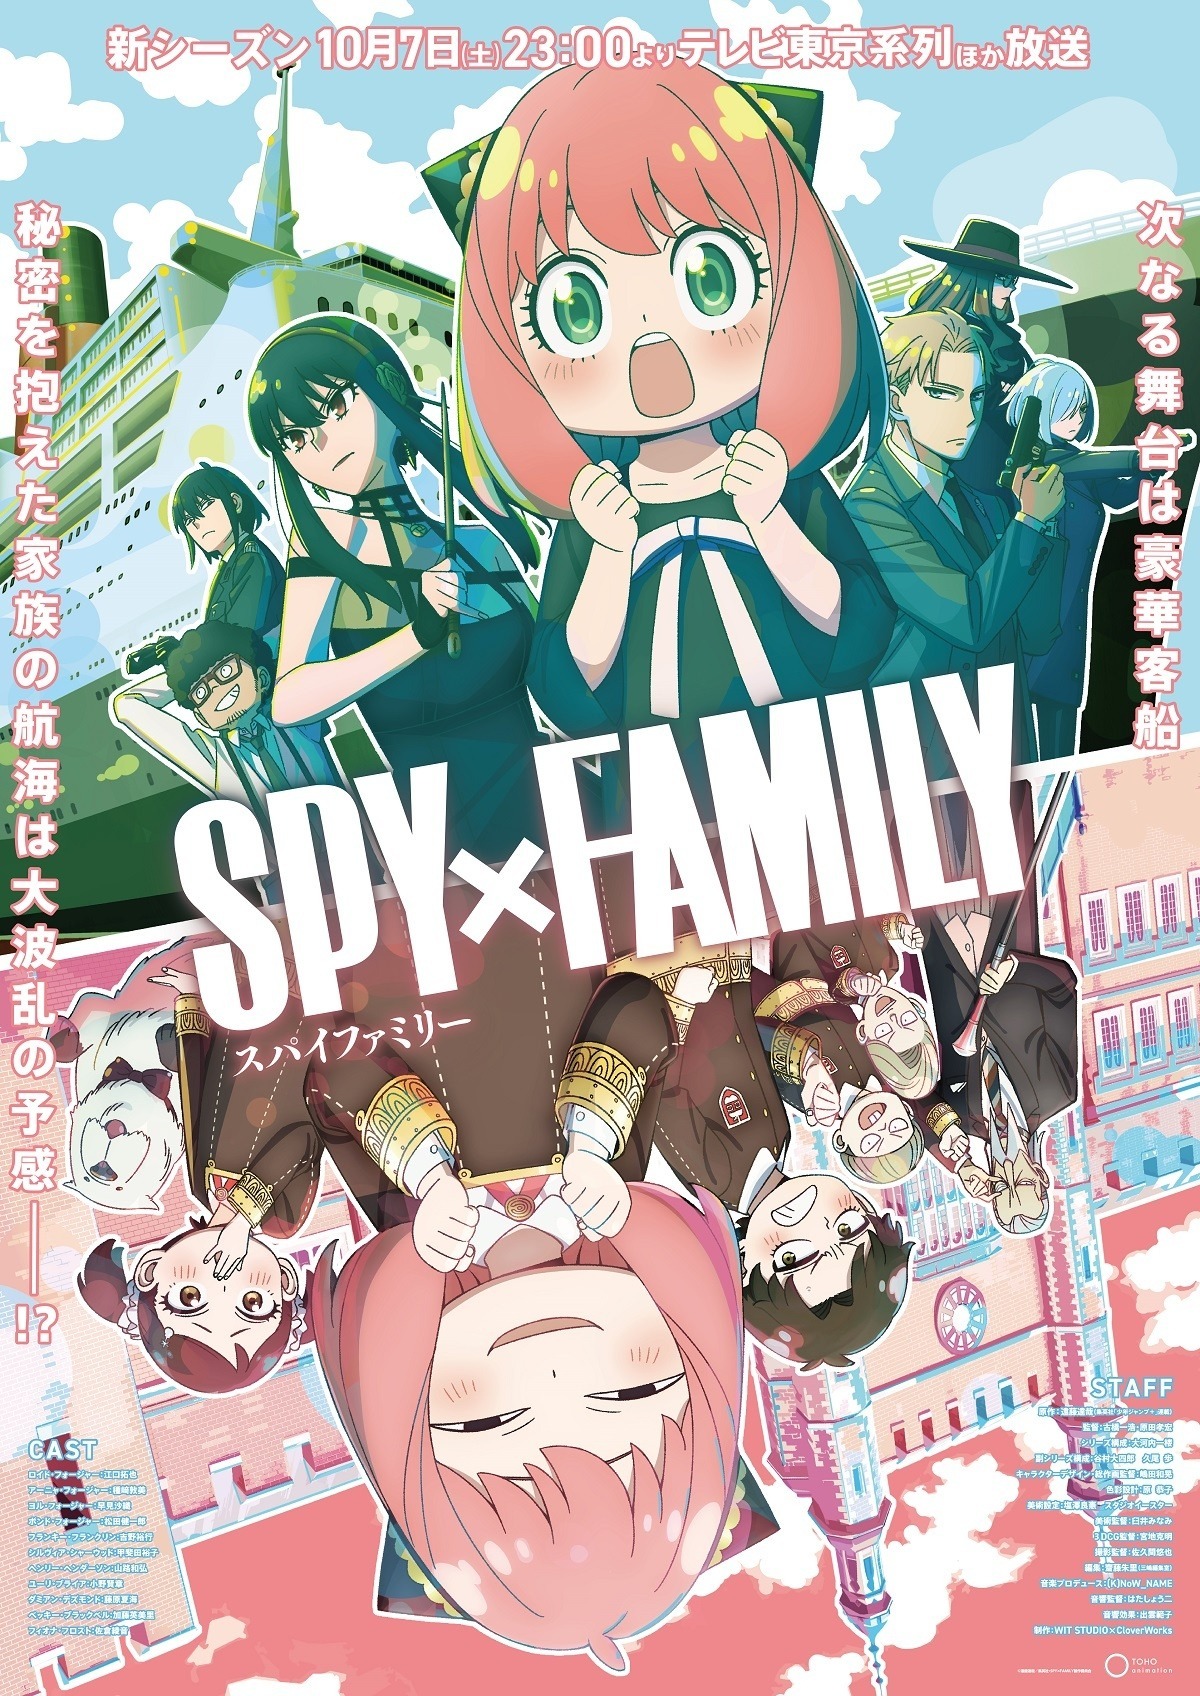 SPY x FAMILY Cour 2 Reveals Stunning Opening Theme Song Animation